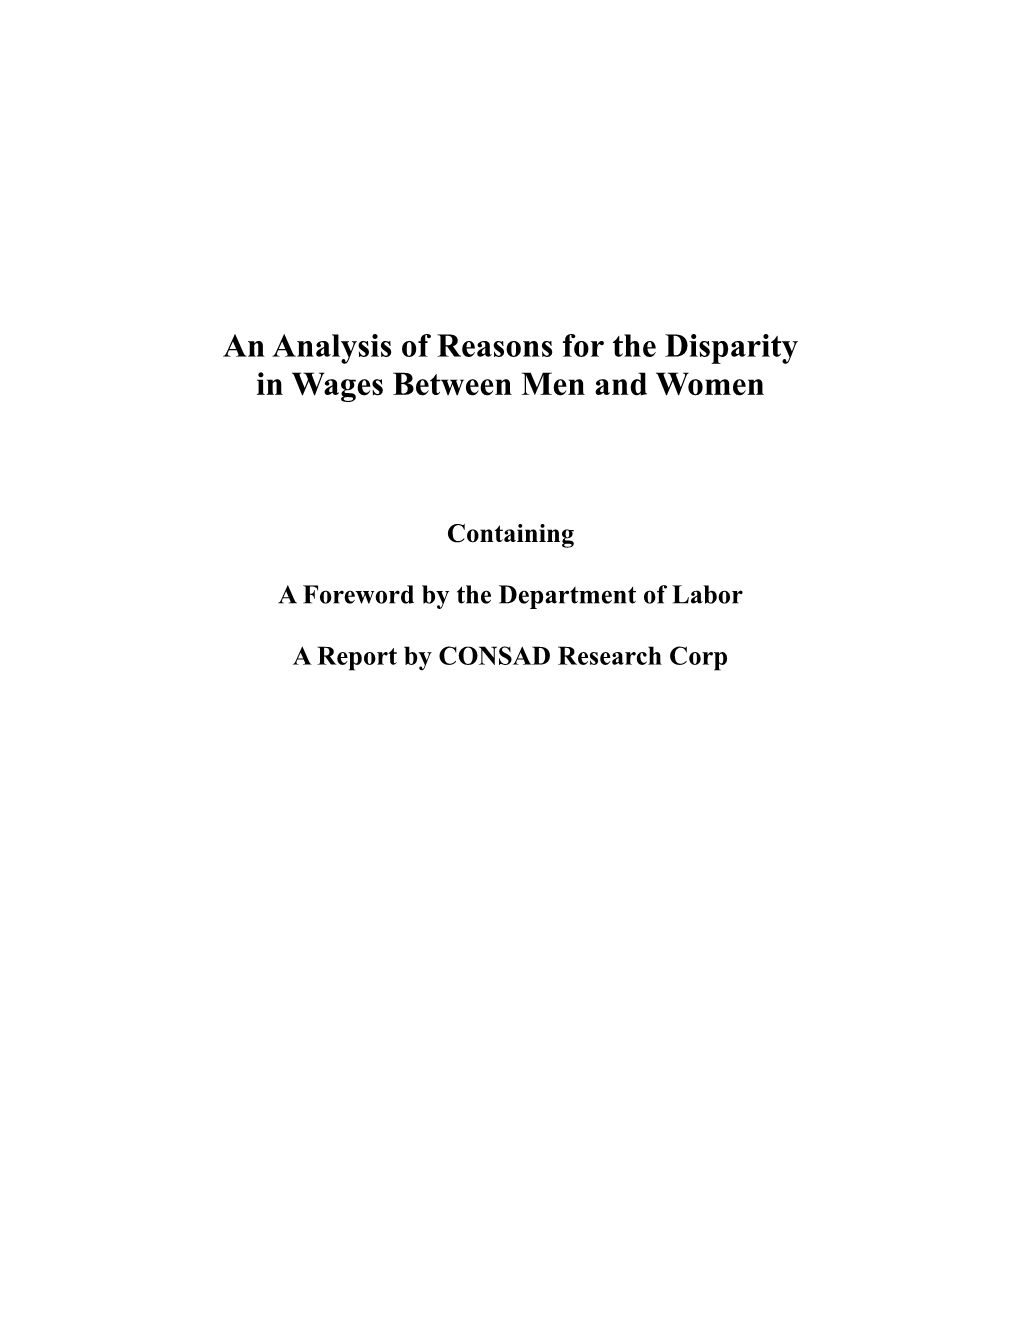 An Analysis of Reasons for the Disparity in Wages Between Men and Women